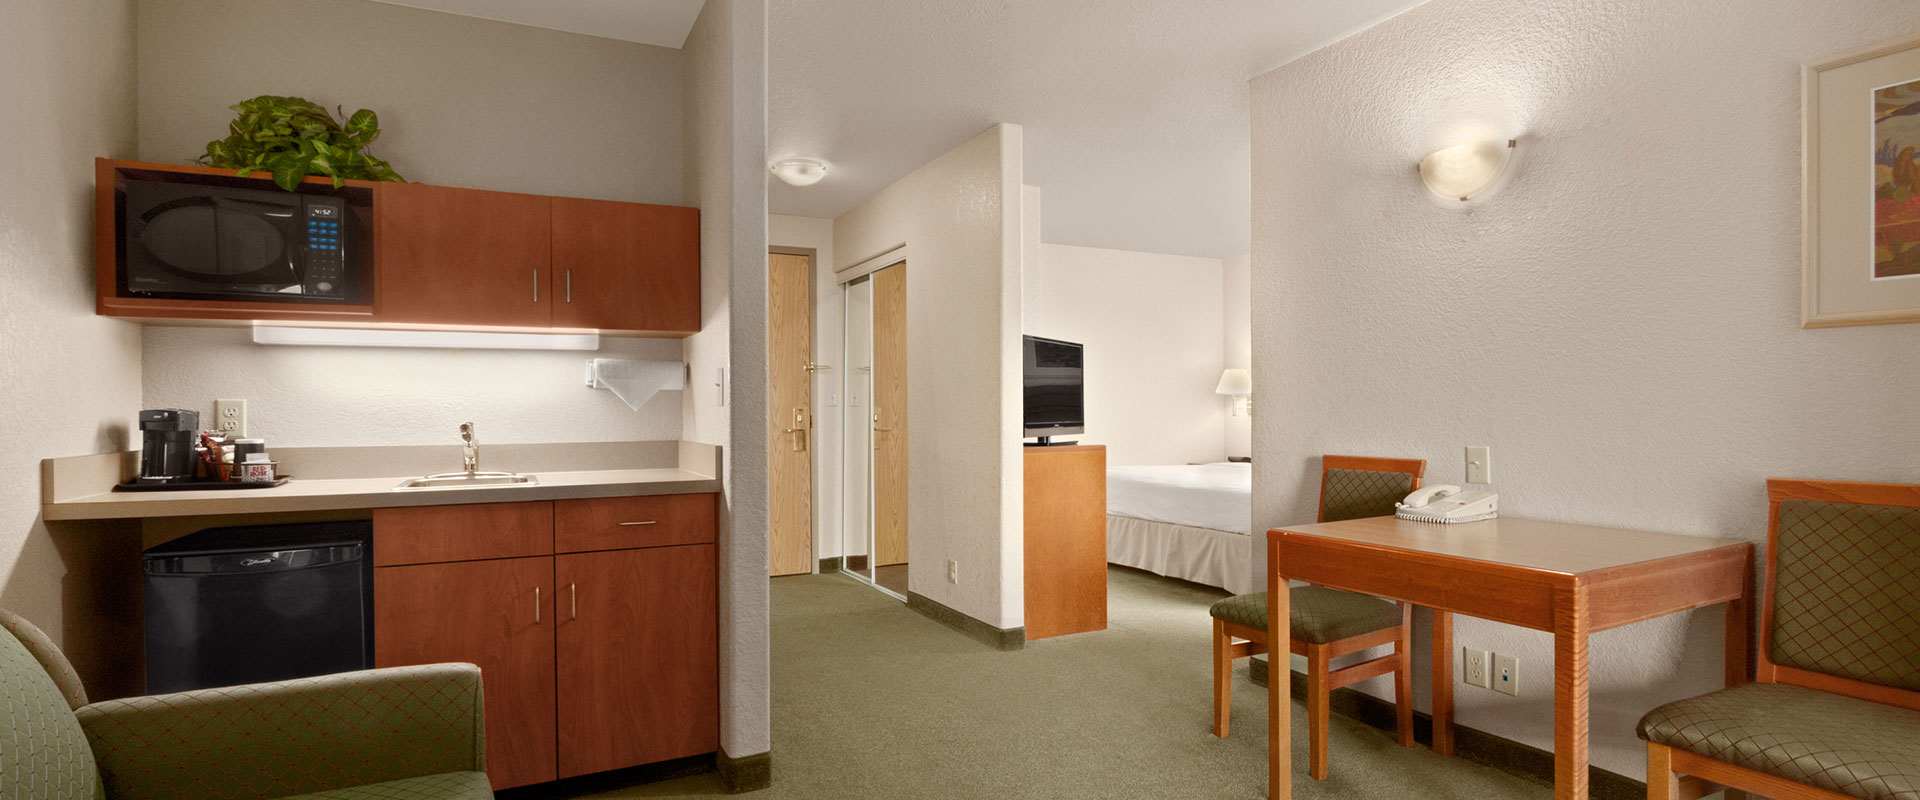 Large view of a compact kitchenette suite with microwave, dishwasher and square table with seating at Days Inn Red Deer, Alberta.
